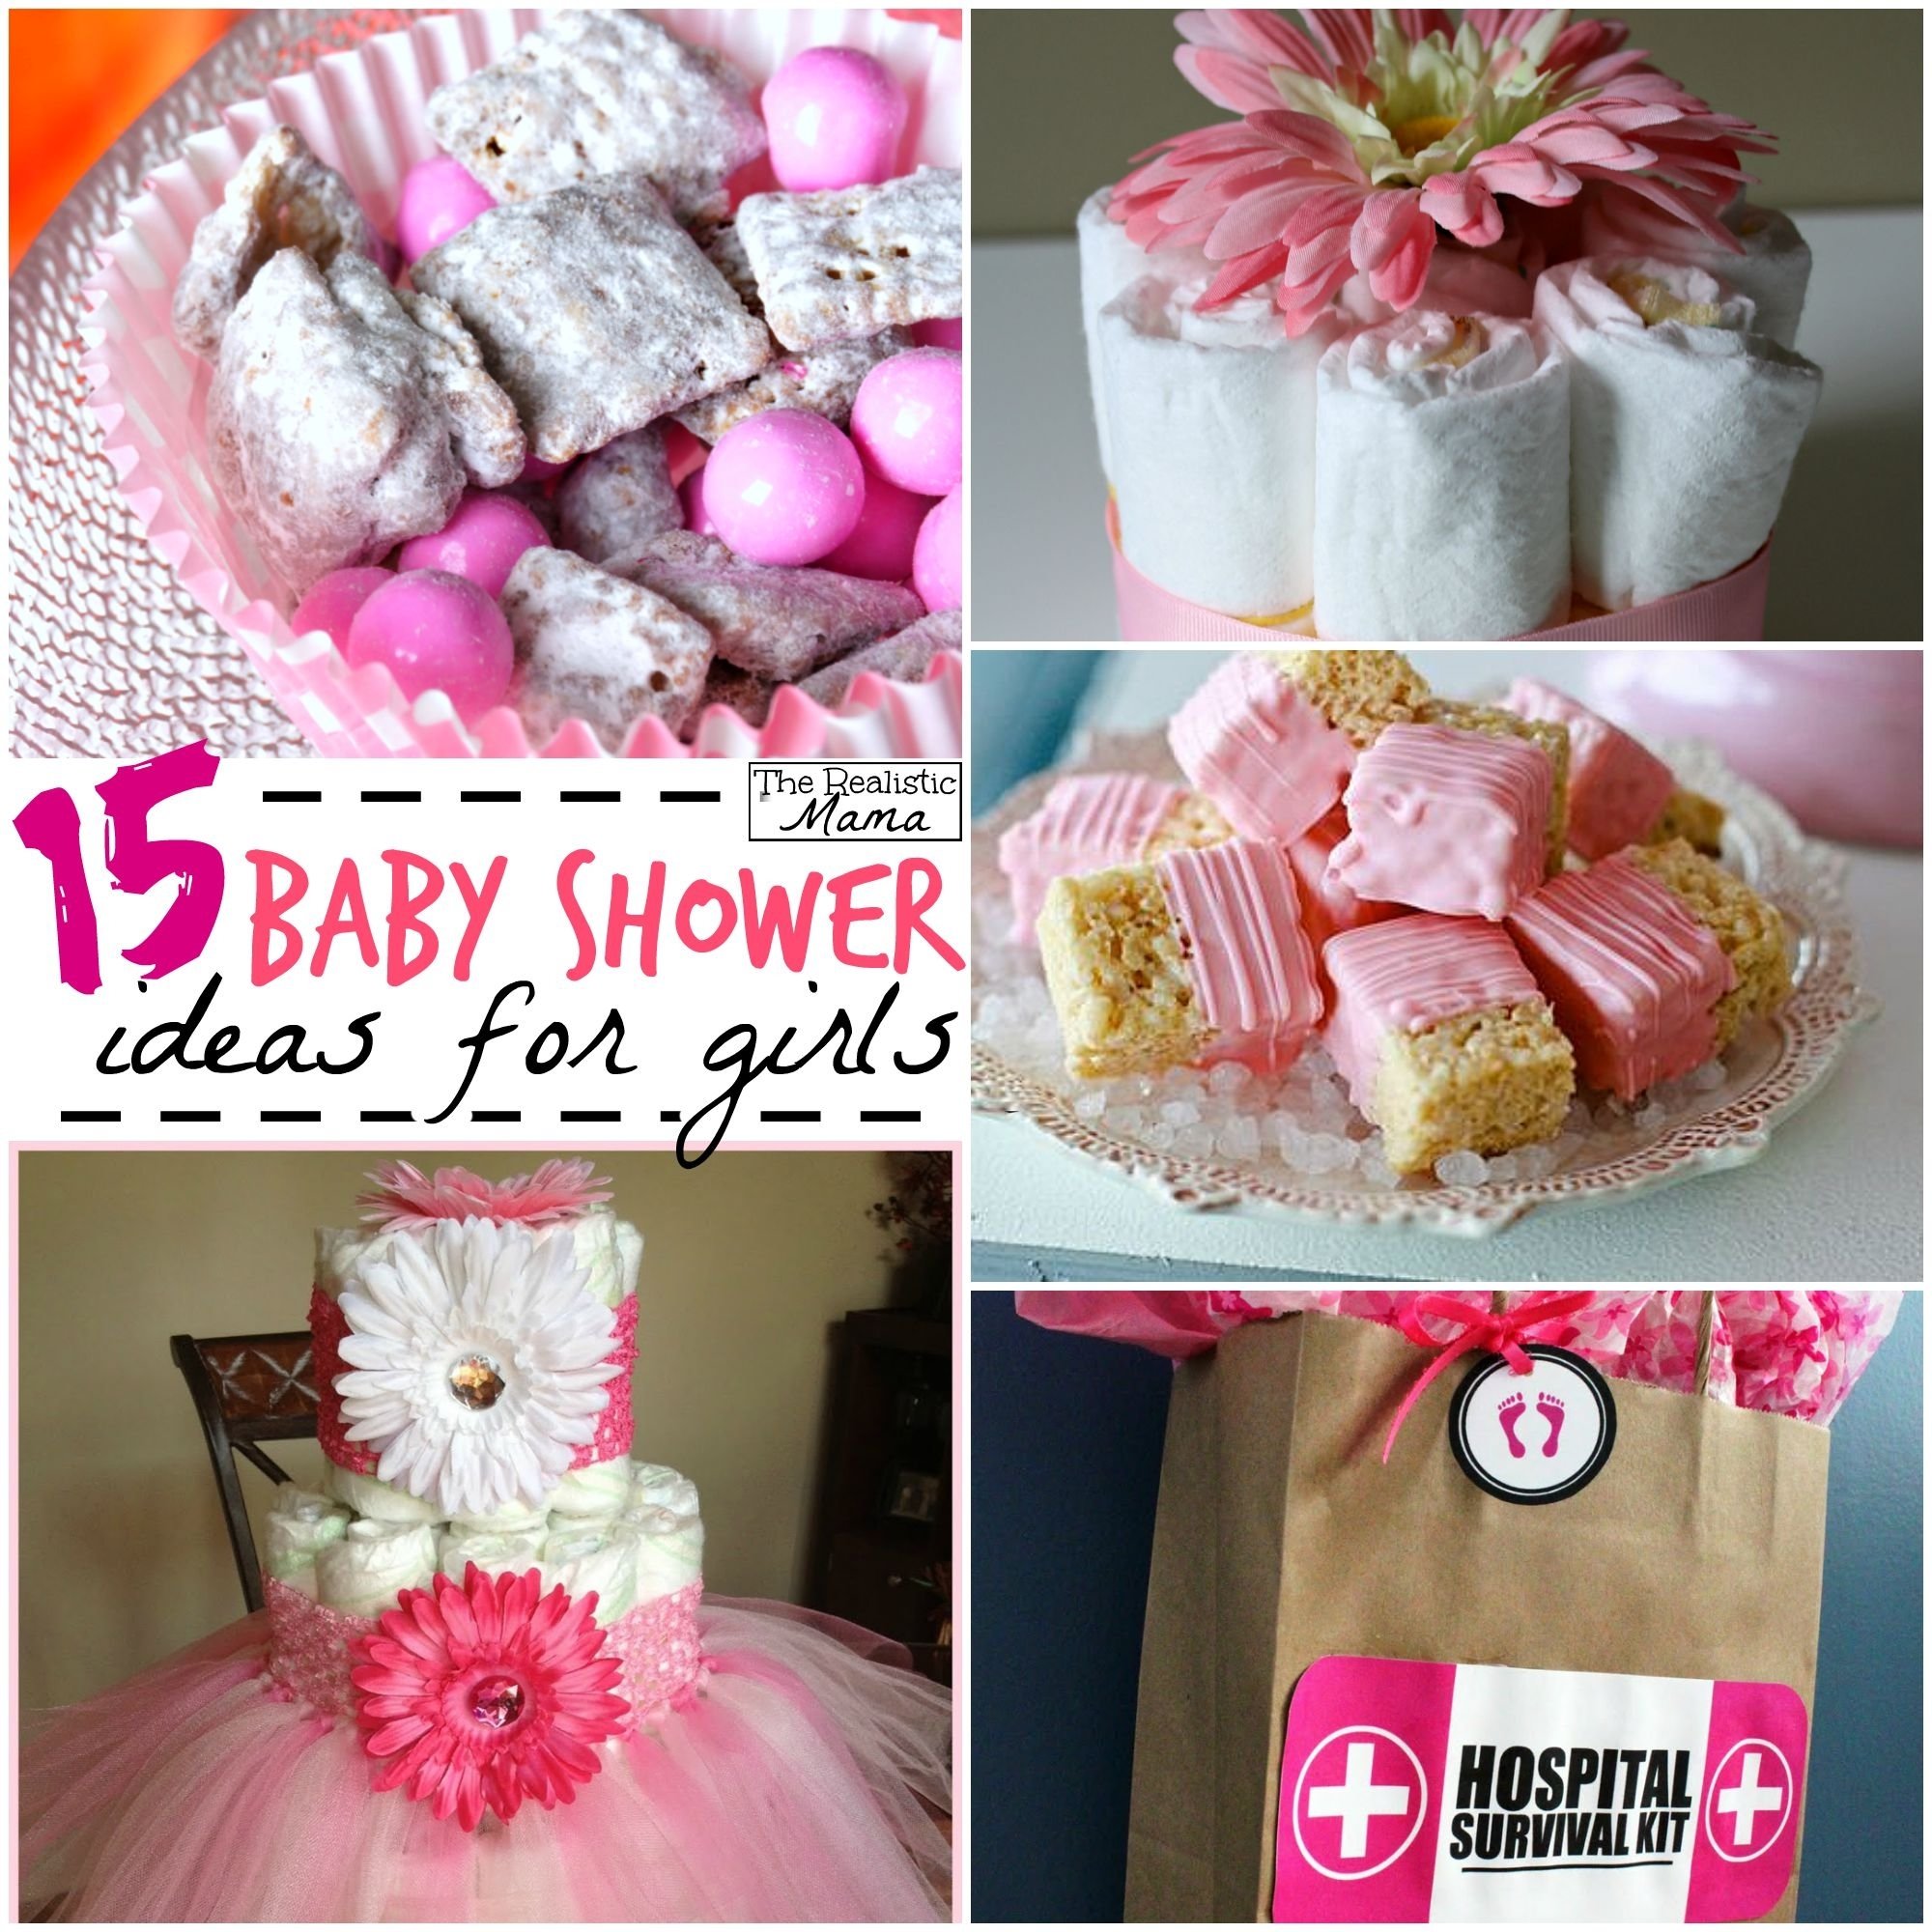 10 Unique Cute Baby Shower Ideas For A Girl 15 baby shower ideas for girls the realistic mama 16 2022